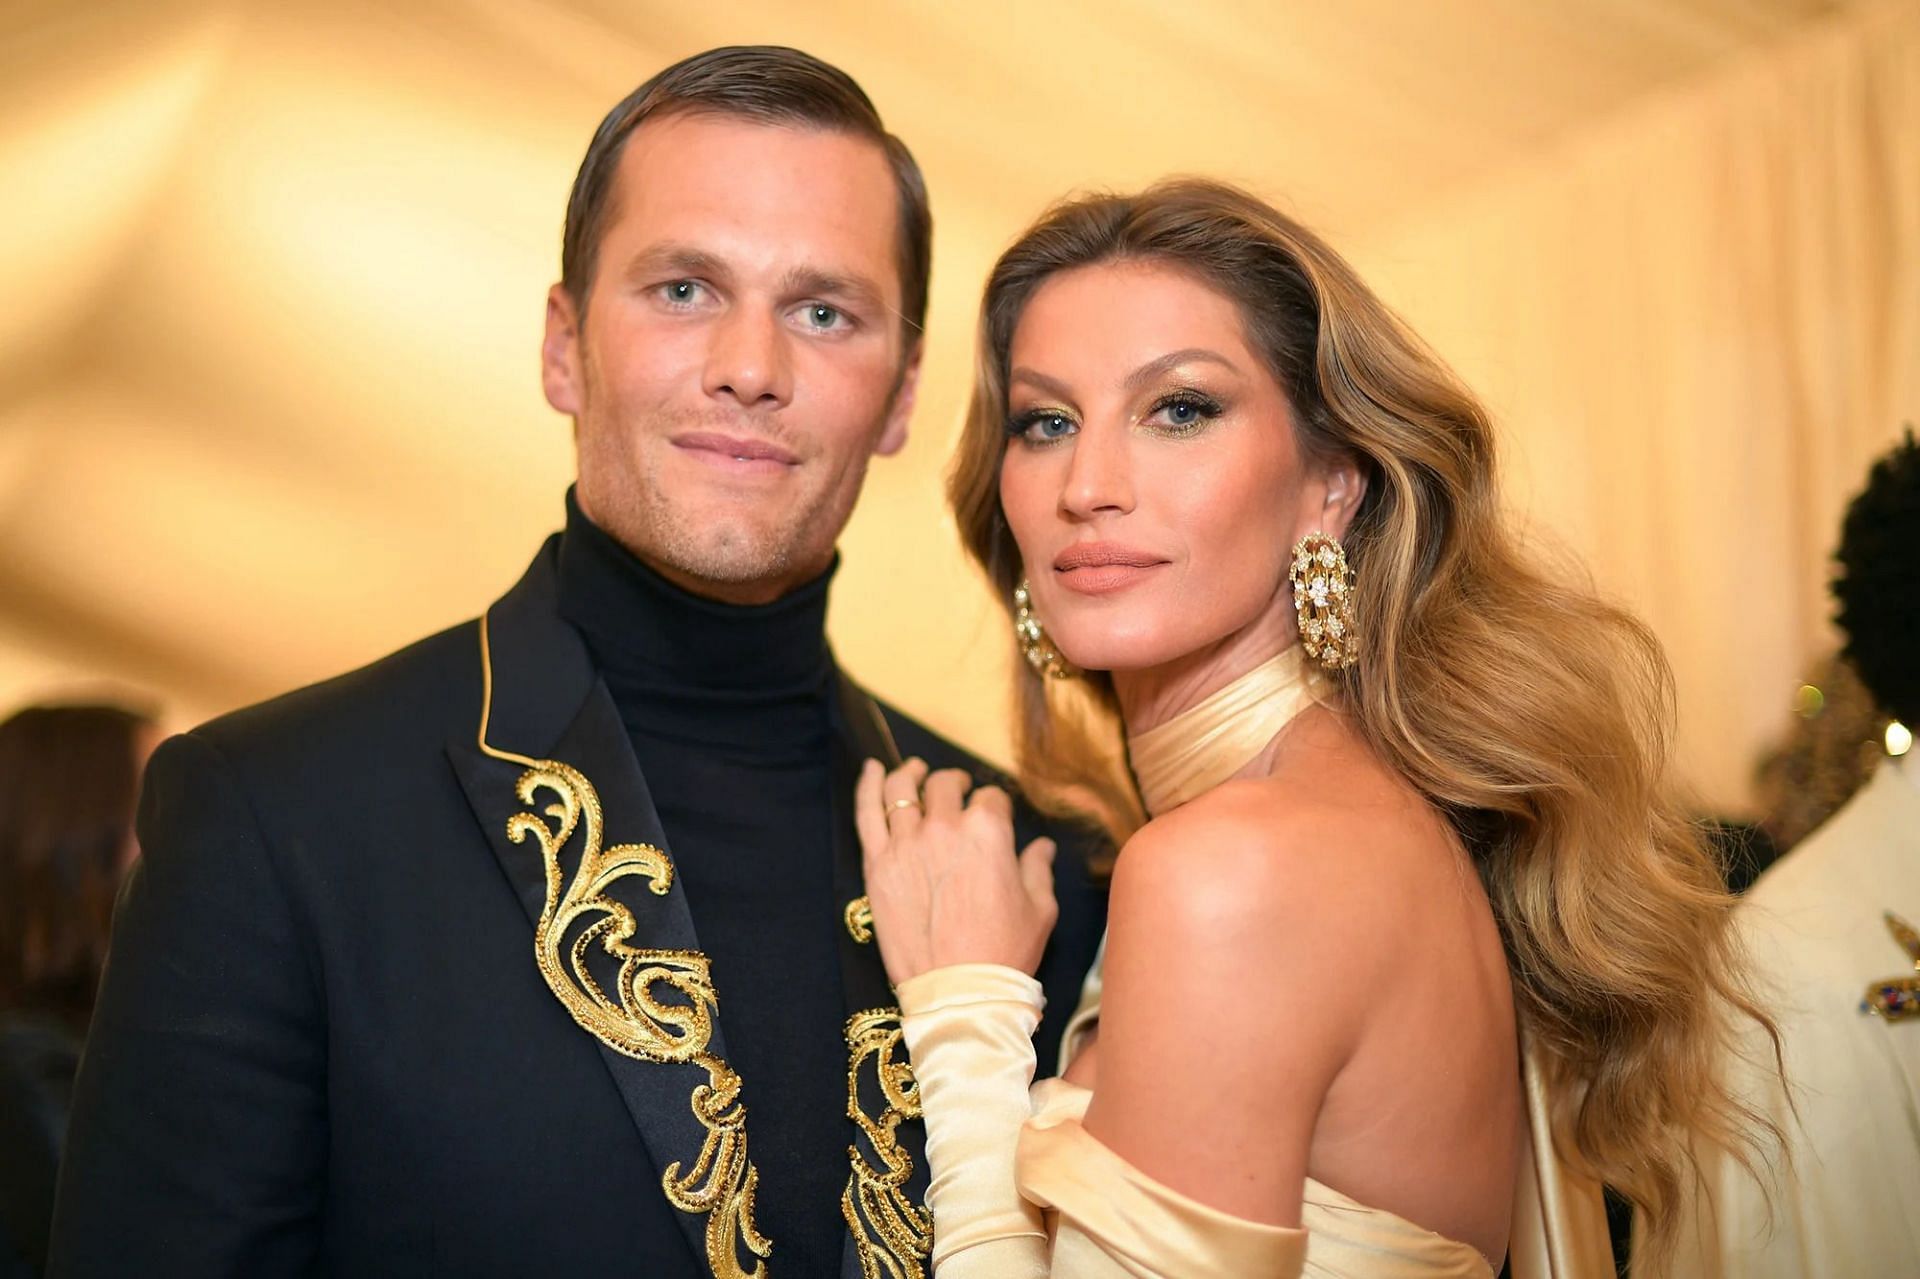 Brady and his wife, supermodel Gisele Bundchen. Source: Us Weekly